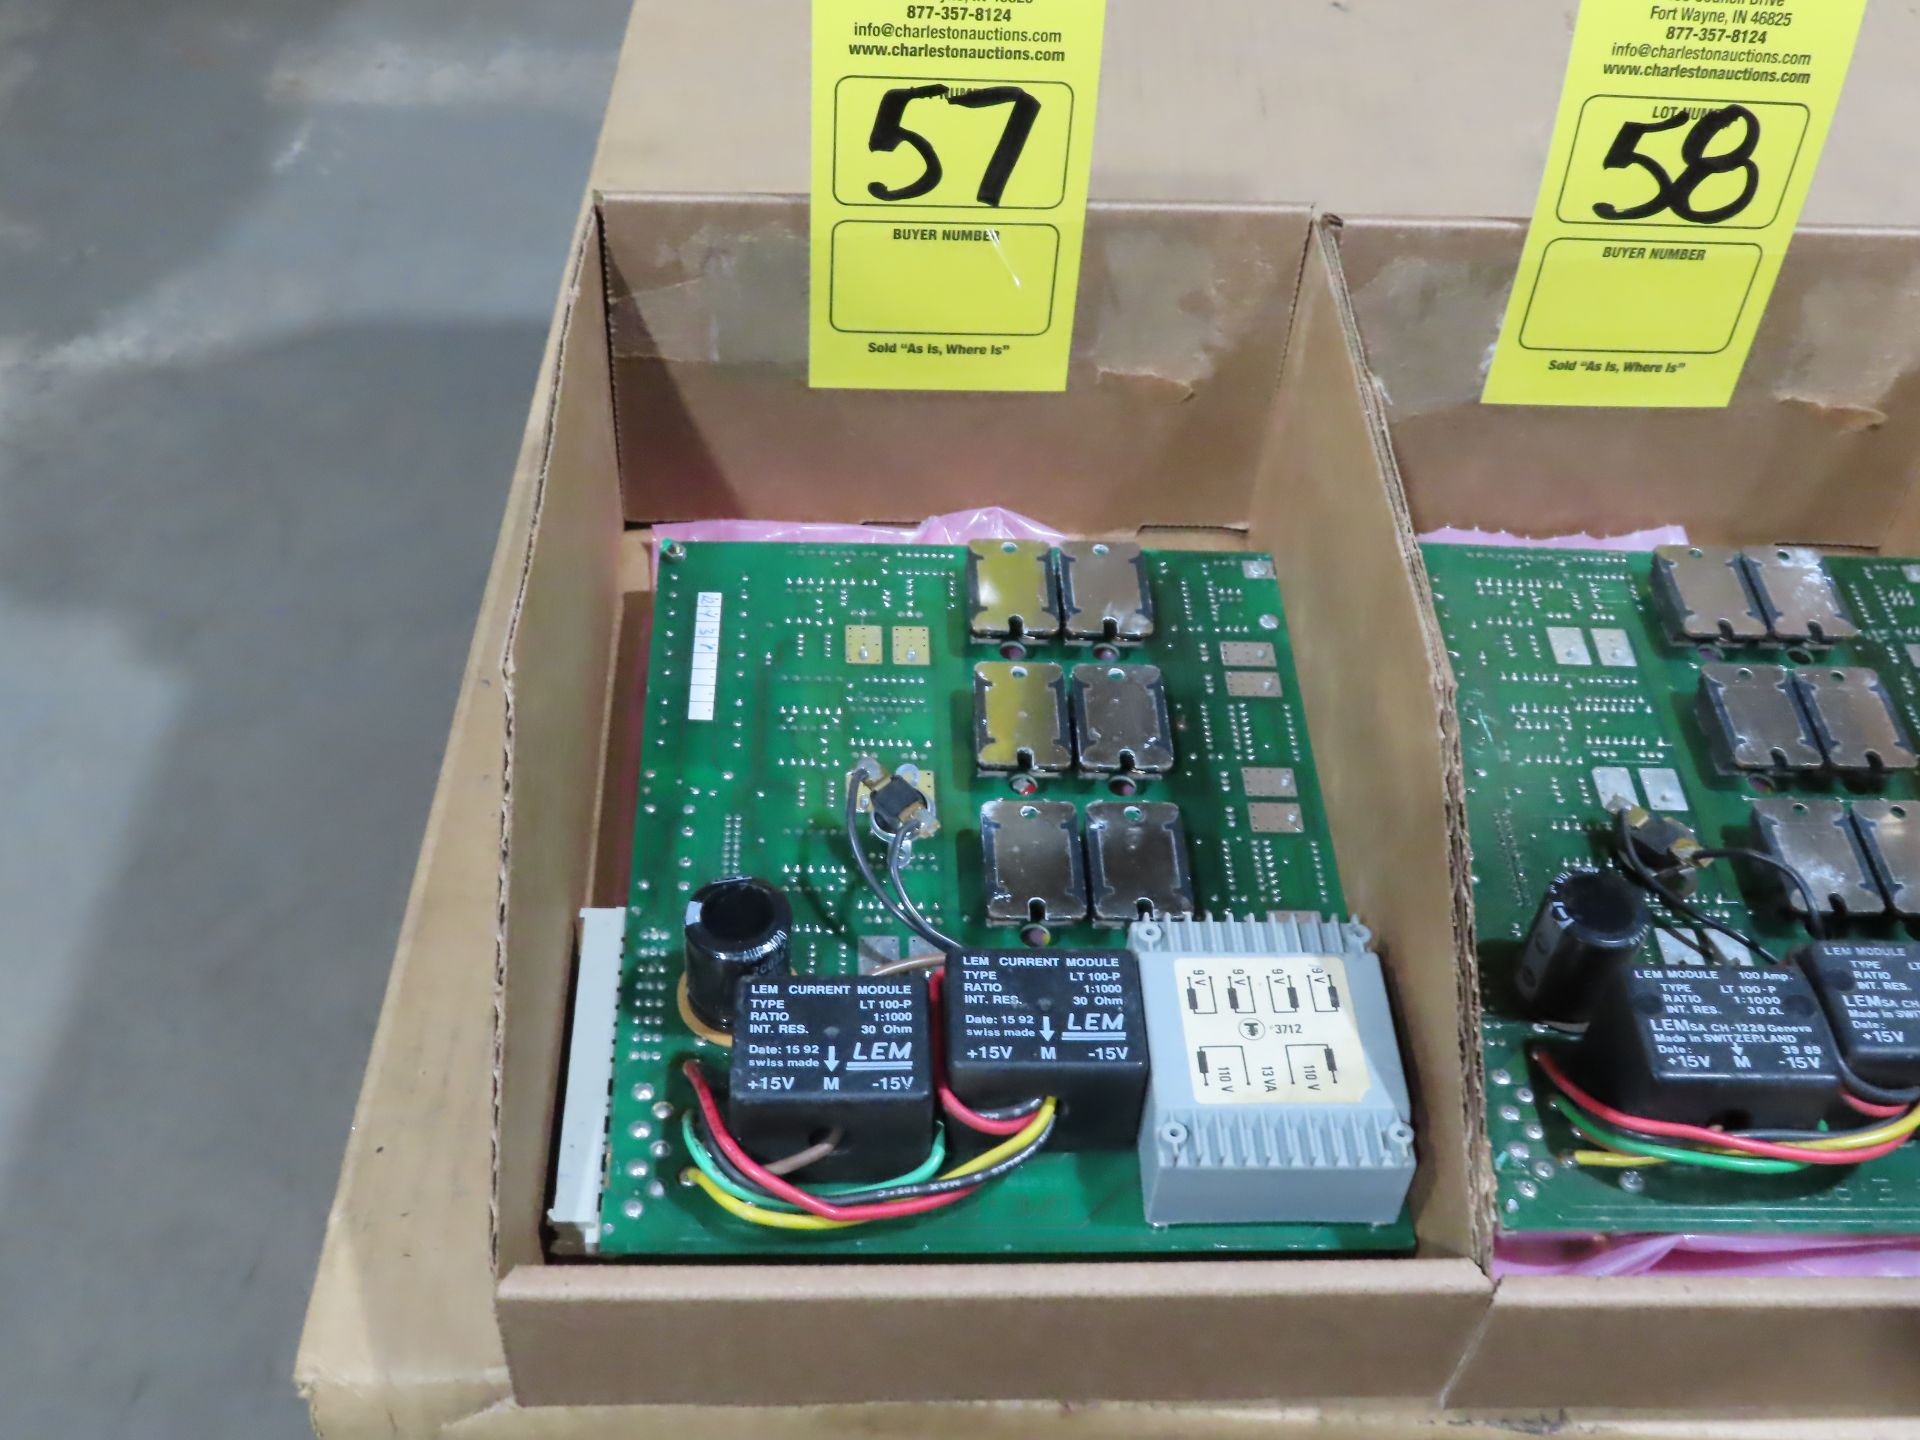 Atlas Copco model 4240-0151-00 servo controller, as always, with Brolyn LLC auctions, all lots can